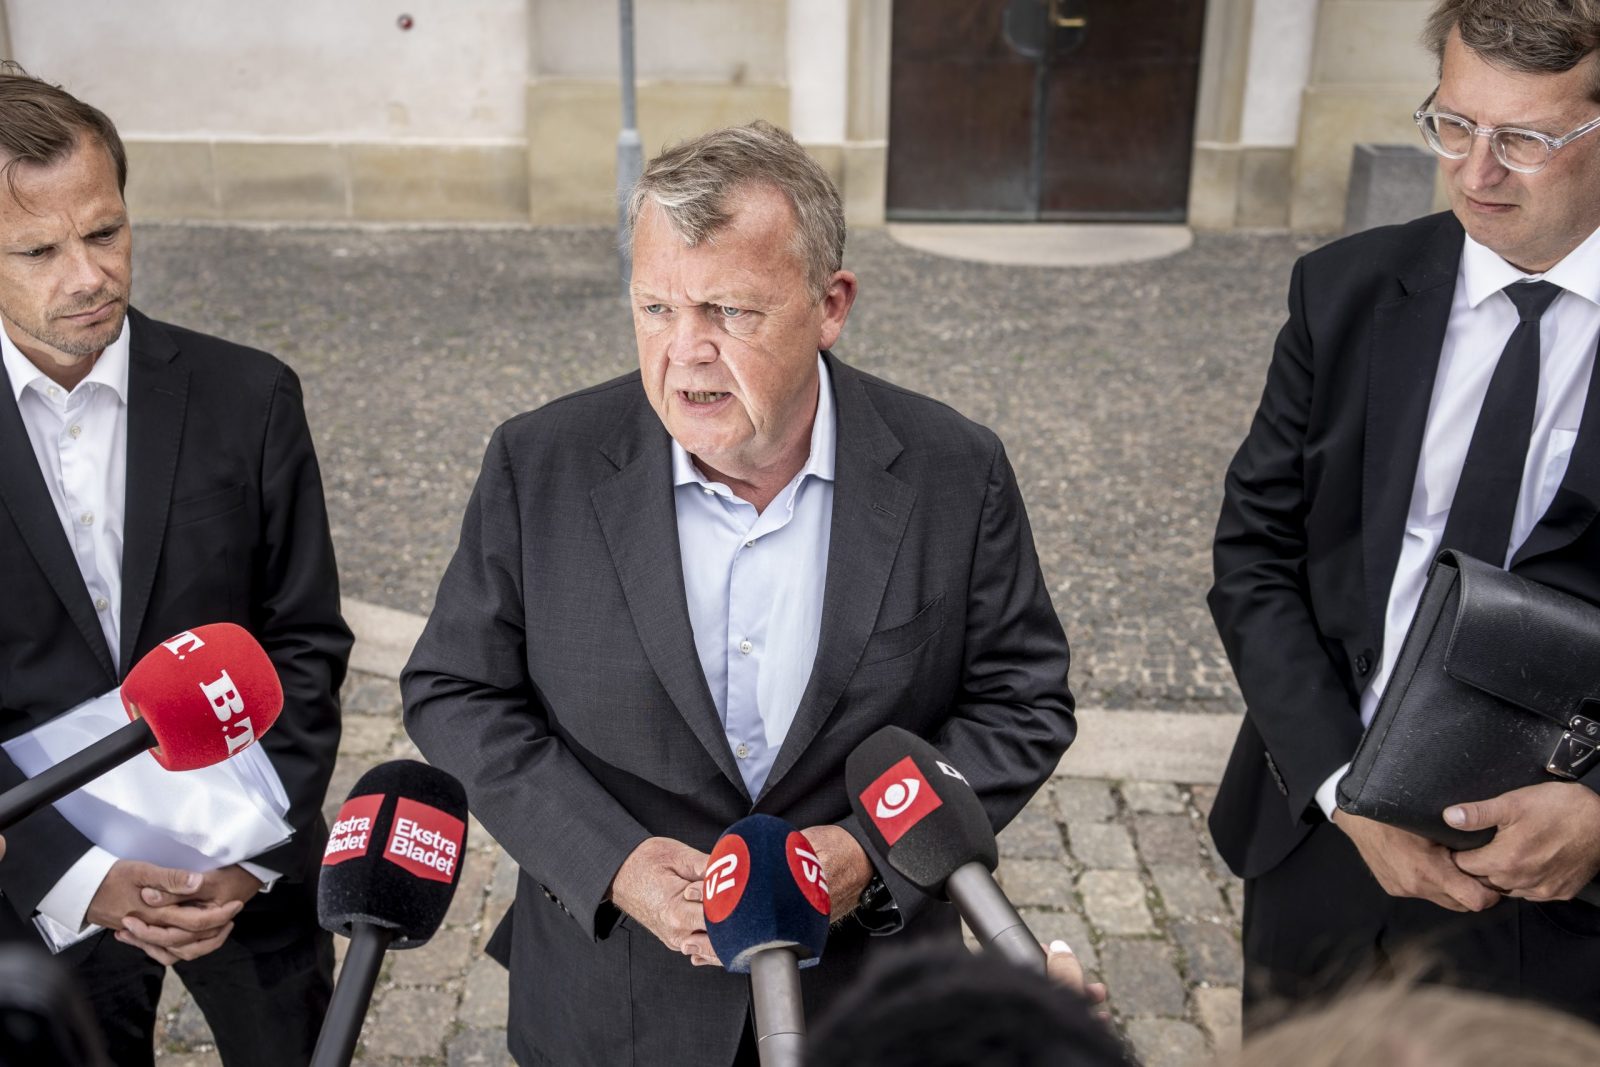 epa10778540 Danish Minister of Foreign Affairs Lars Loekke Rasmussen (C), flanked by Minister of Justice Peter Hummelgaard (L) and acting Minister of Defense Troels Lund Poulsen, speaks to journalists after a briefing by members of the Danish Parliament on the international reactions to the Koran burnings in Copenhagen, Denmark, 31 July 2023.  EPA/Mads Claus Rasmussen  DENMARK OUT